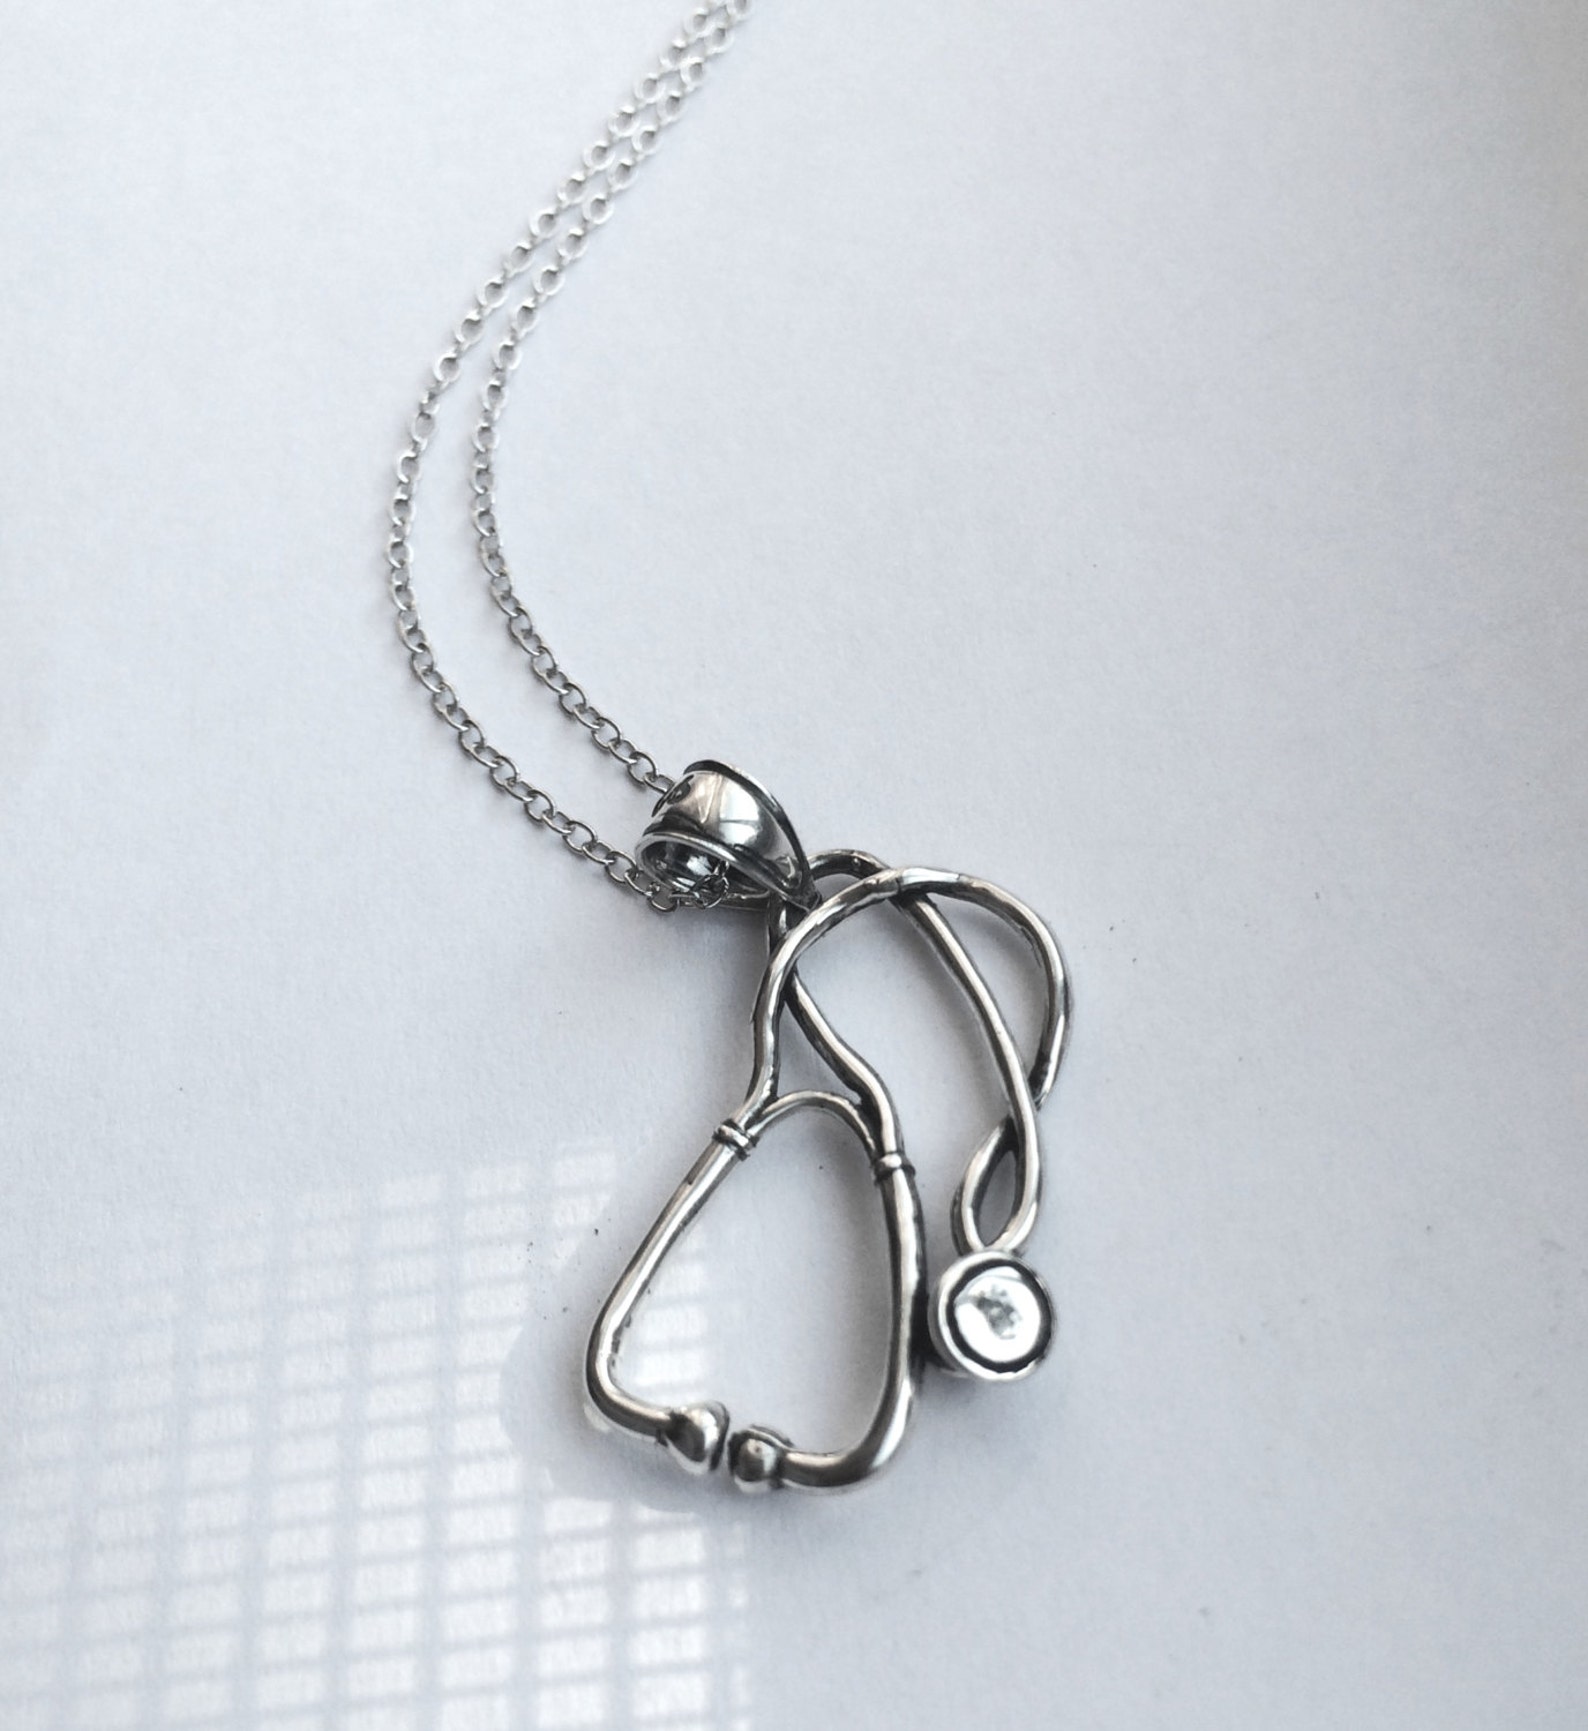 Stethoscope Necklace in Sterling Silver Graduation Jewelry - Etsy